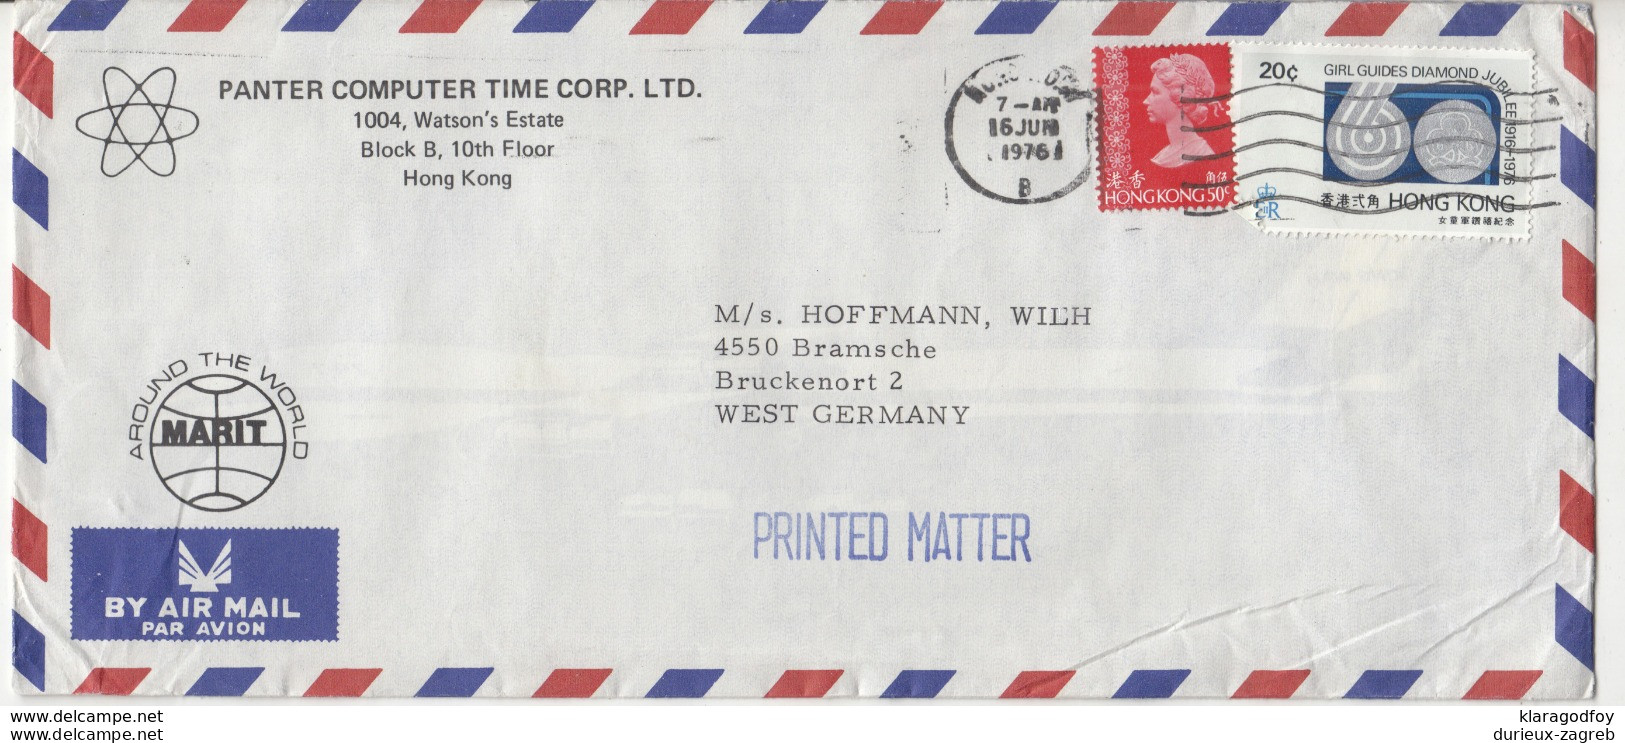 Panter Computer Time Corp. Company Air Mail Letter Cover Travelled 1976 To Germany B190922 - Brieven En Documenten